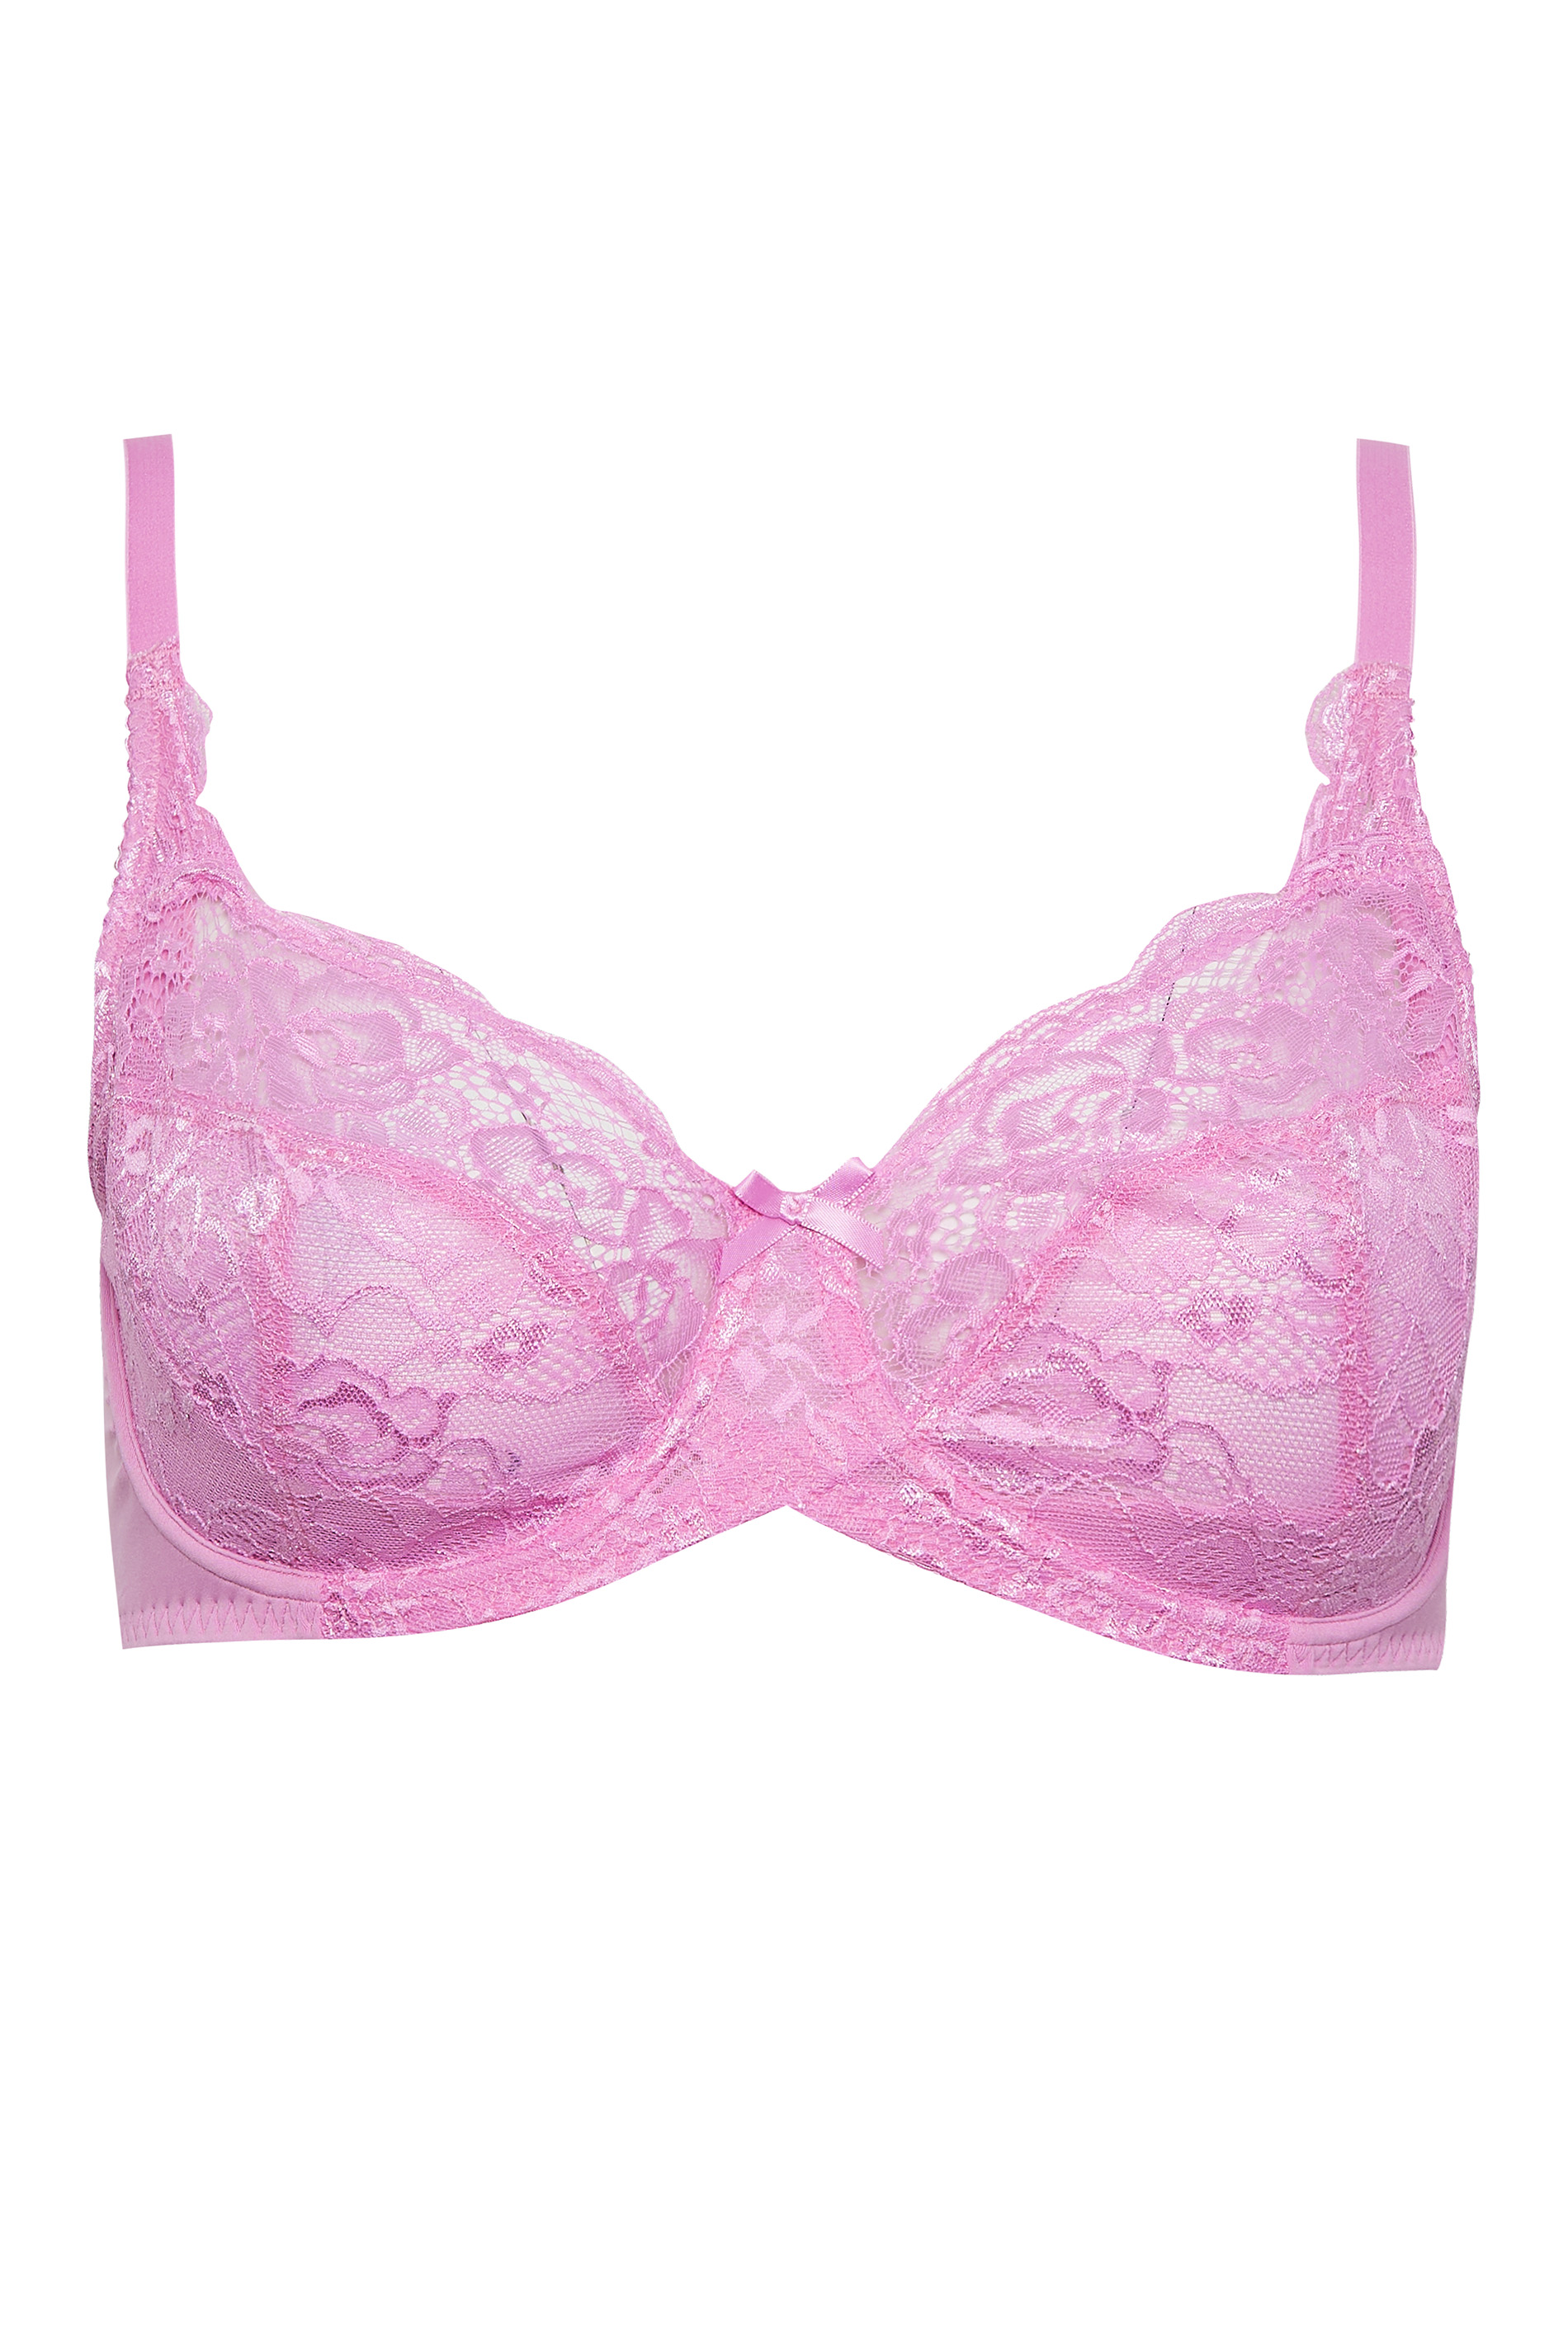 EFFORTLESS BEAUTY HOT PINK PADDED NON WIRED BRA